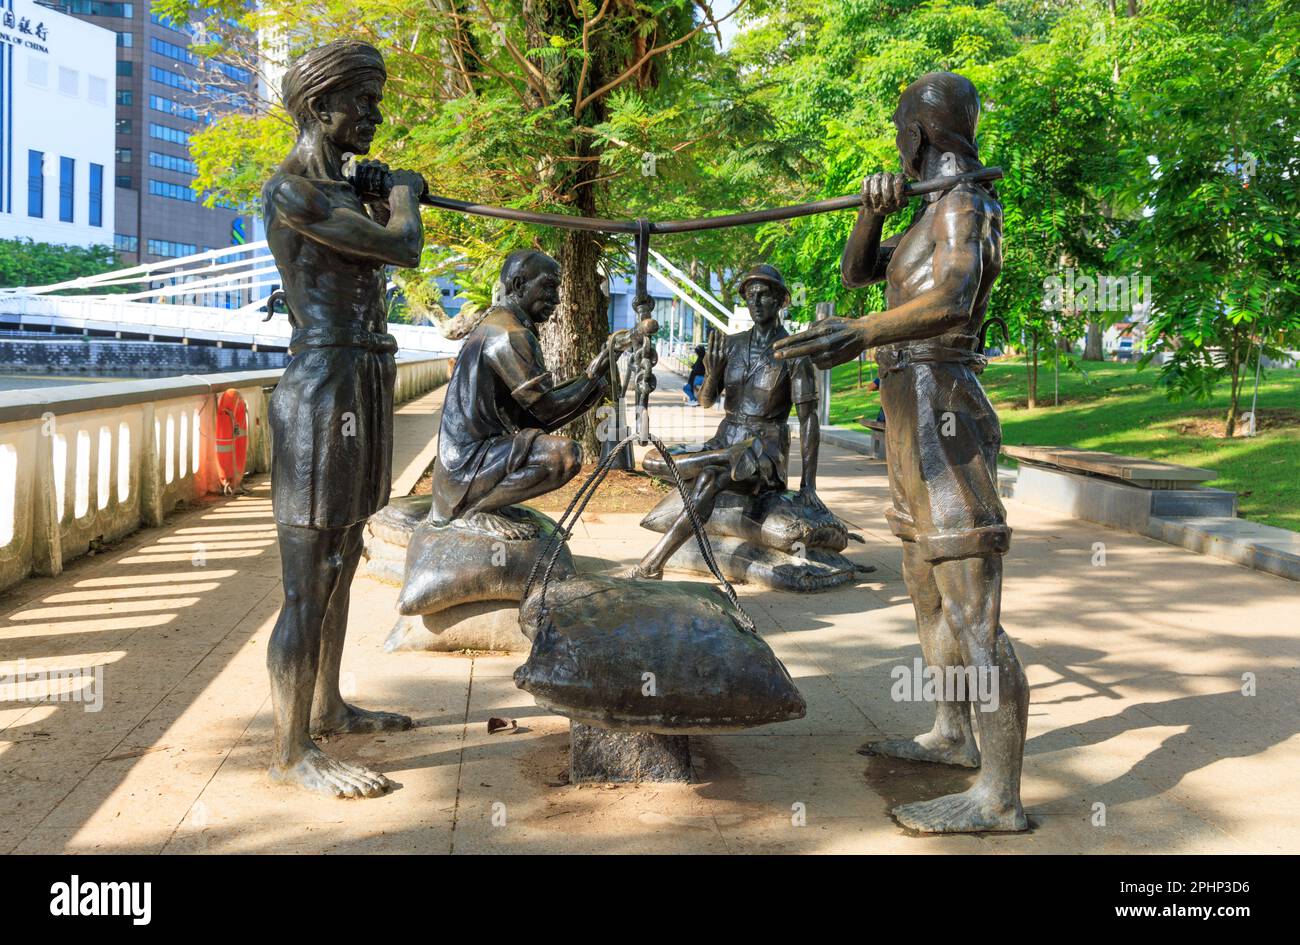 'A Great Emporium' statues beside Singapore River Stock Photo